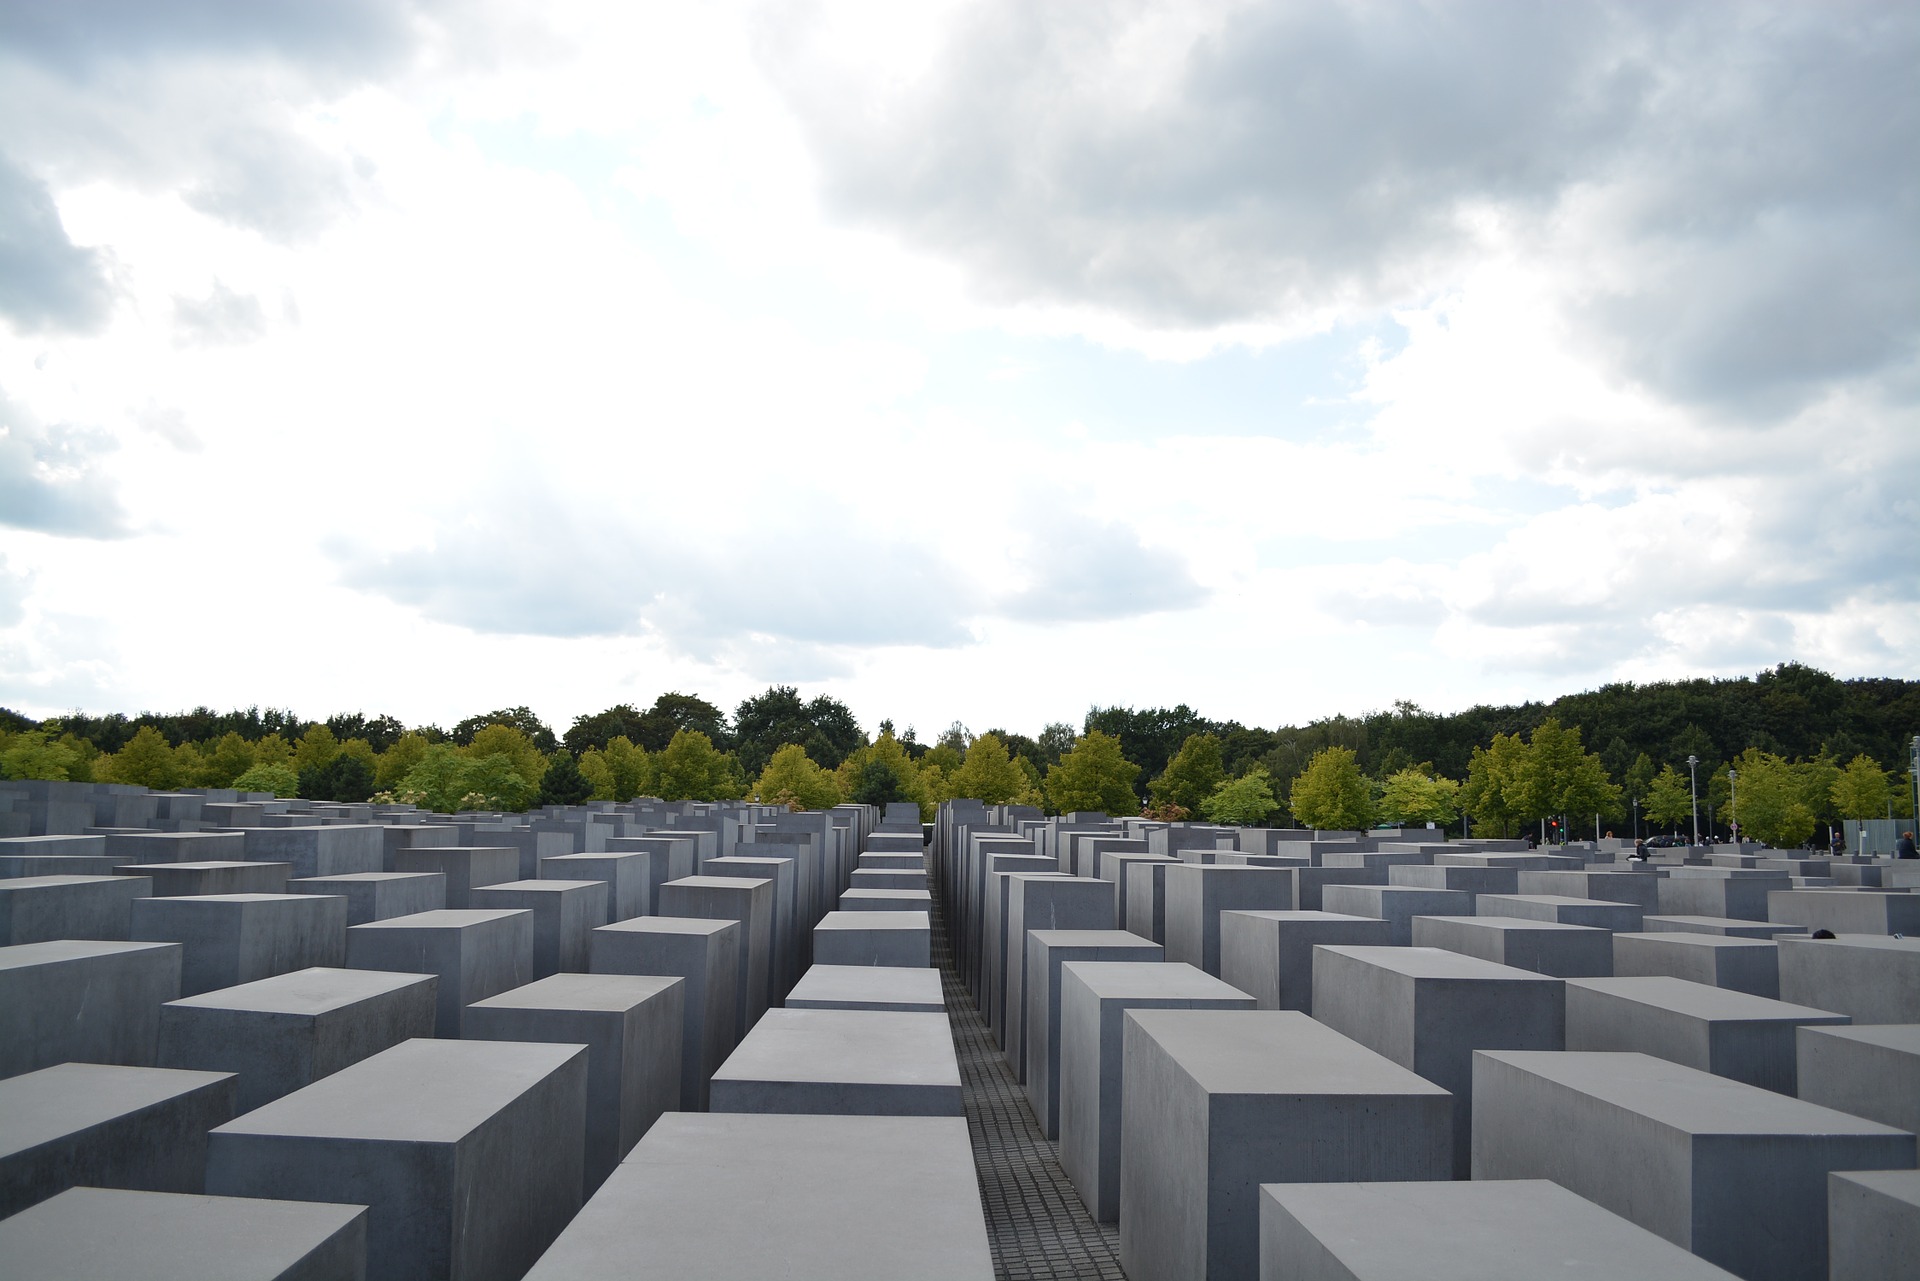 View over the top of the Holocaust memorial in Berlin